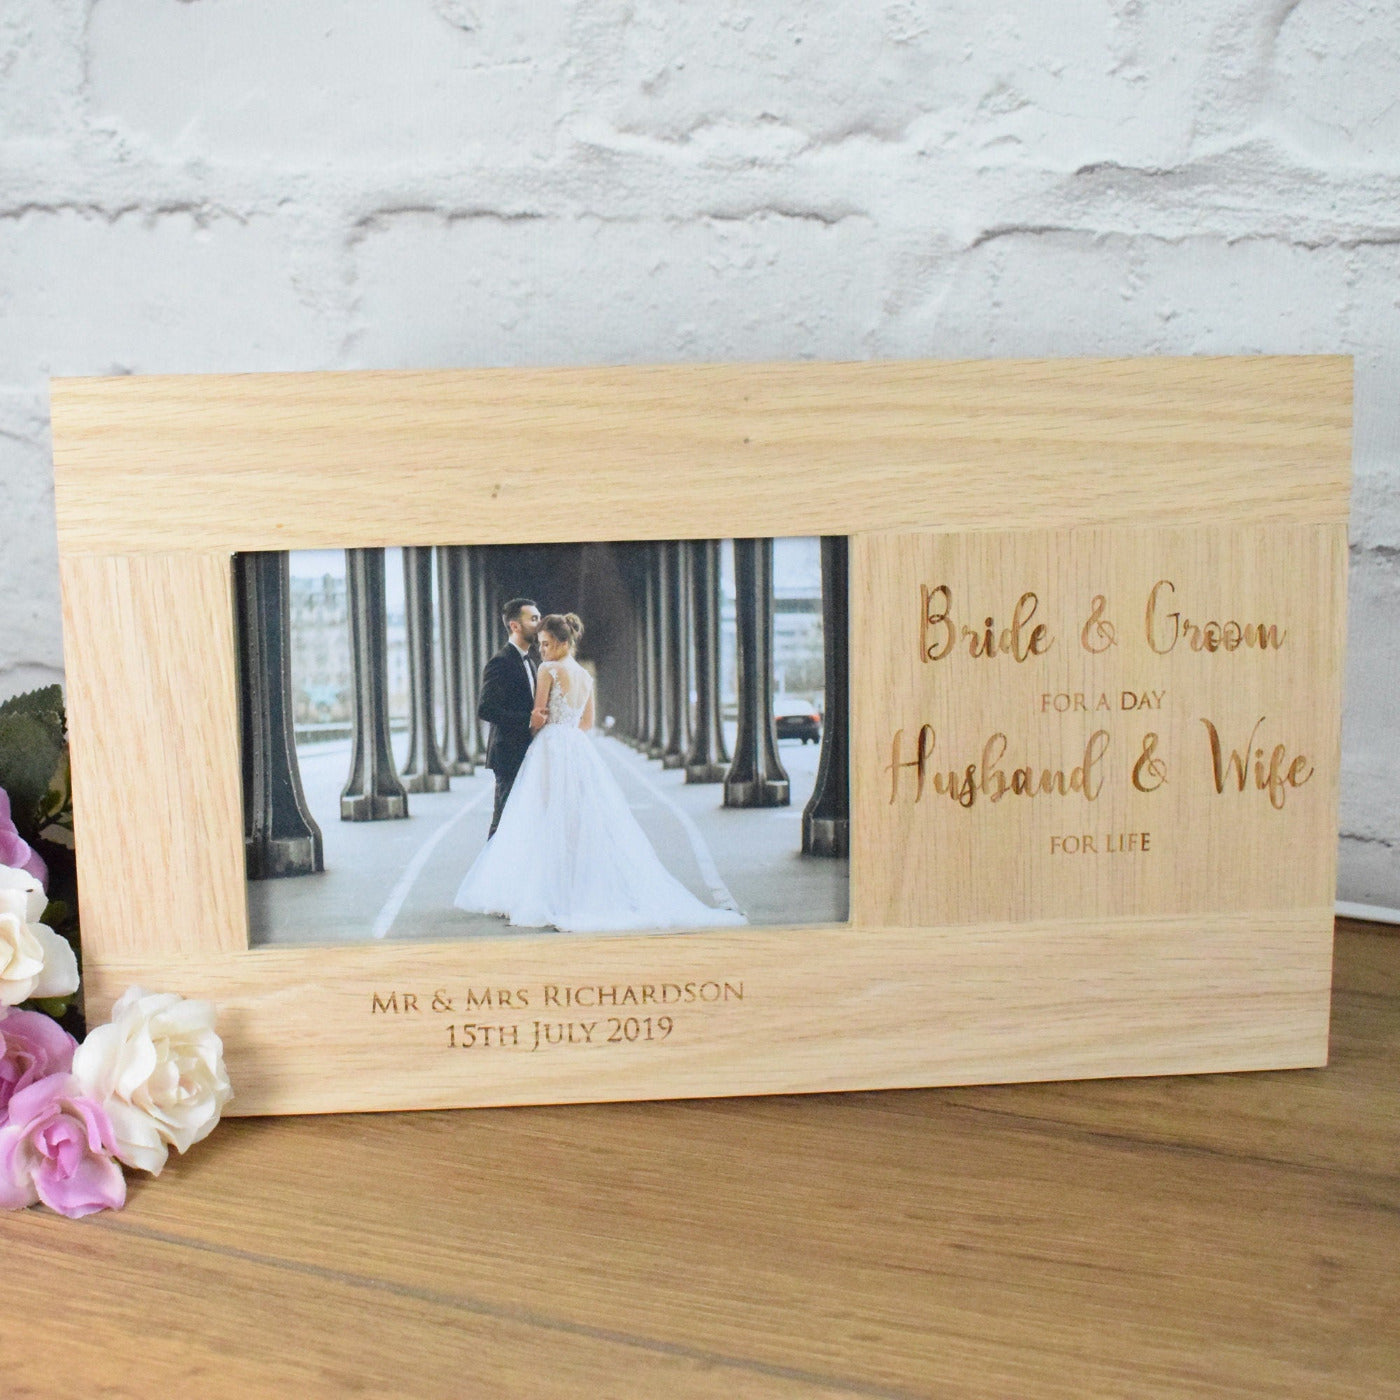 Personalised Wedding Photo Frame, Wedding Frames Personalised, Wedding Gift, Engraved Solid Oak 6x4 Photo frame - Bride & Groom for a Day....